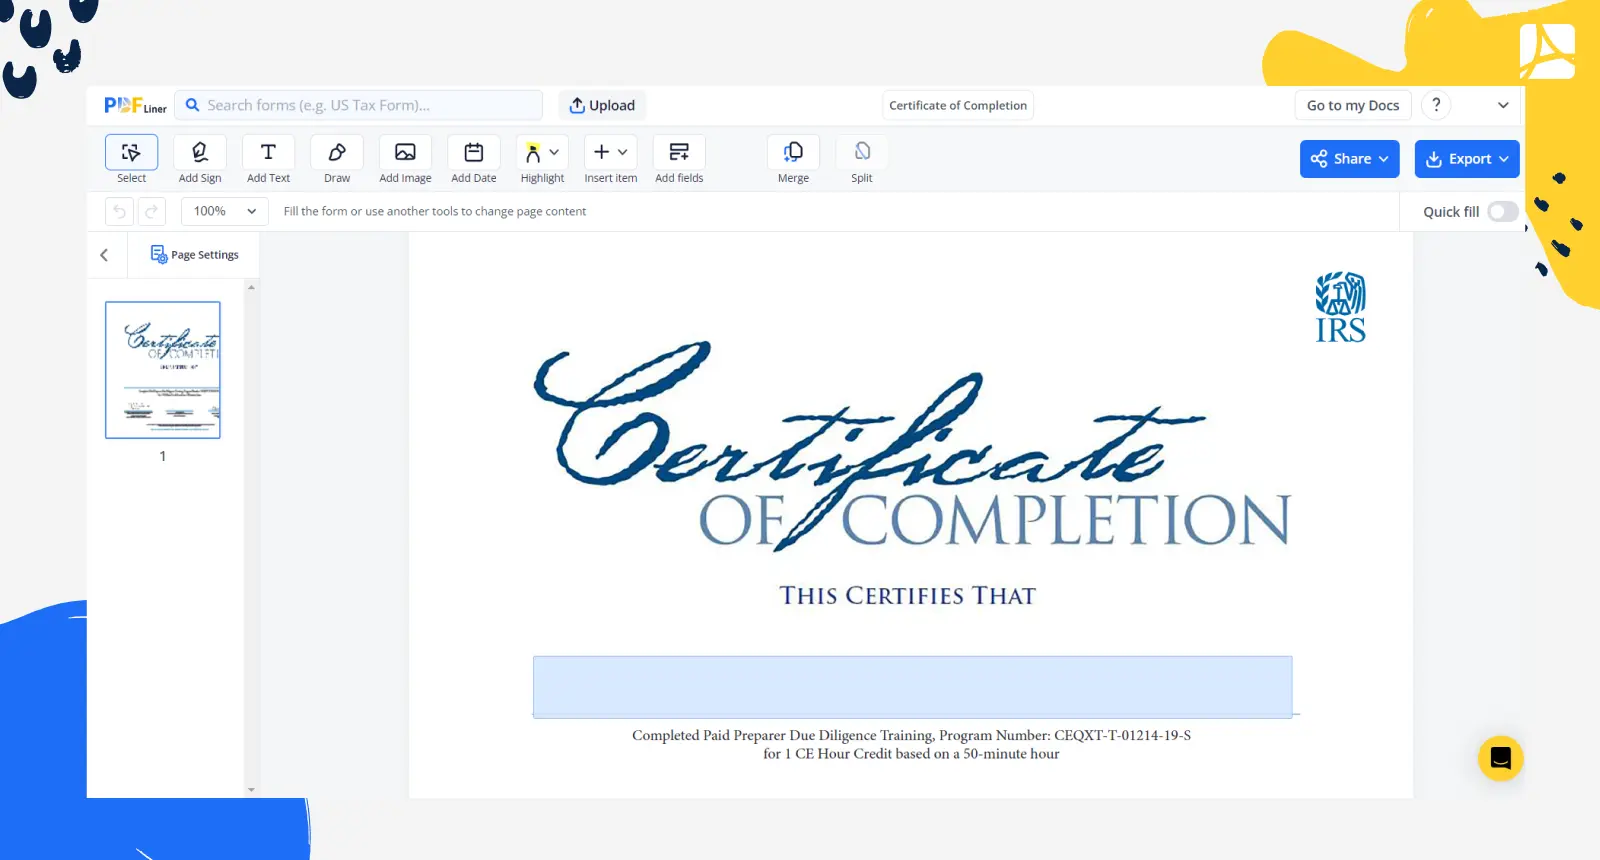 Certificate of Completion Form Screenshot